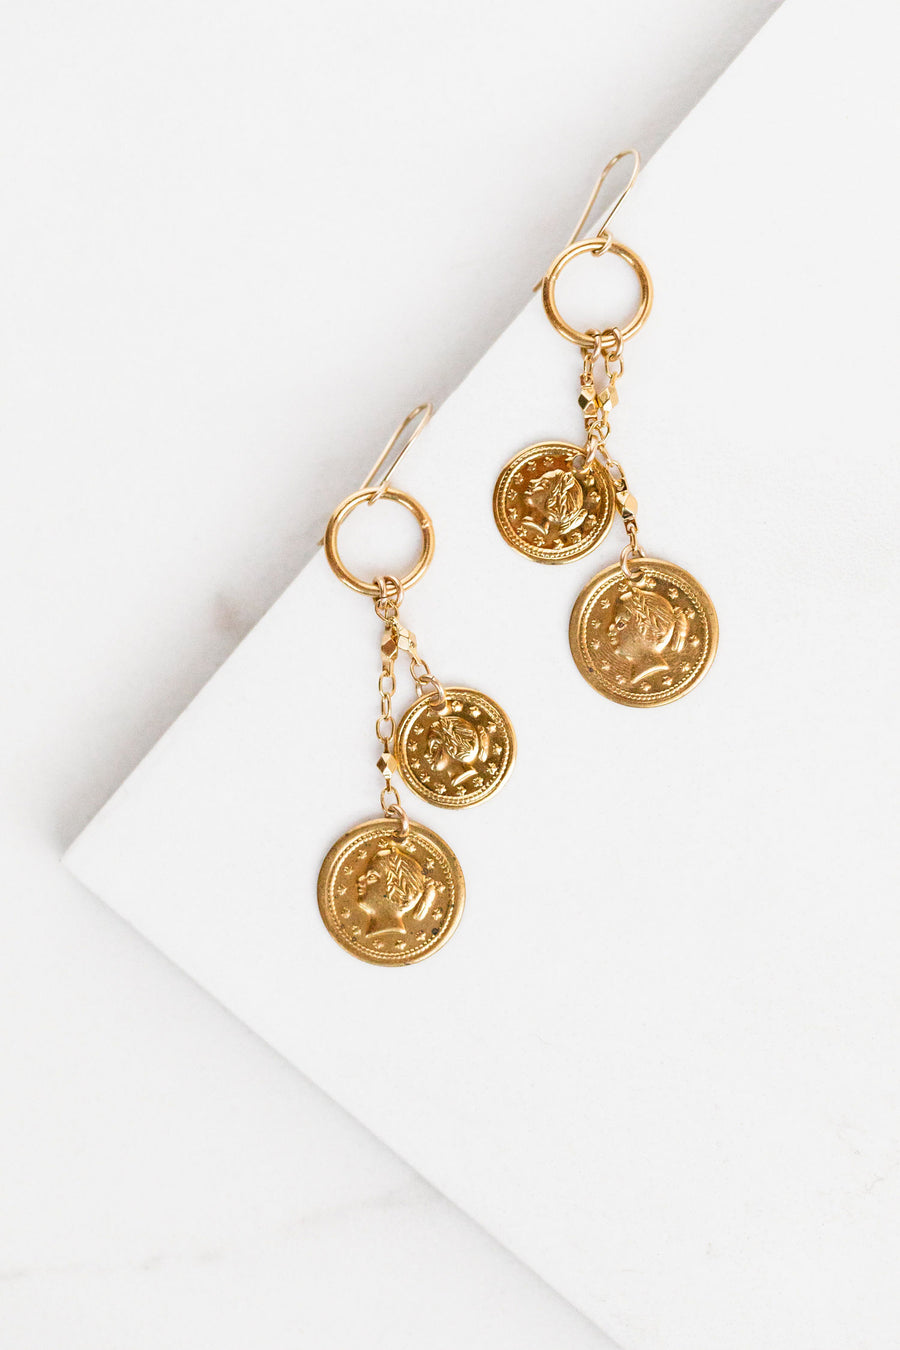 Find the perfect pair of earrings you're looking for from Charme Silkiner! These 14k Gold Hoop Earrings with Gold Coin Accents are seriously stunning. Perfect to dress or dress down any outfit the Chiraz Earrings are the perfect must have for everyone!